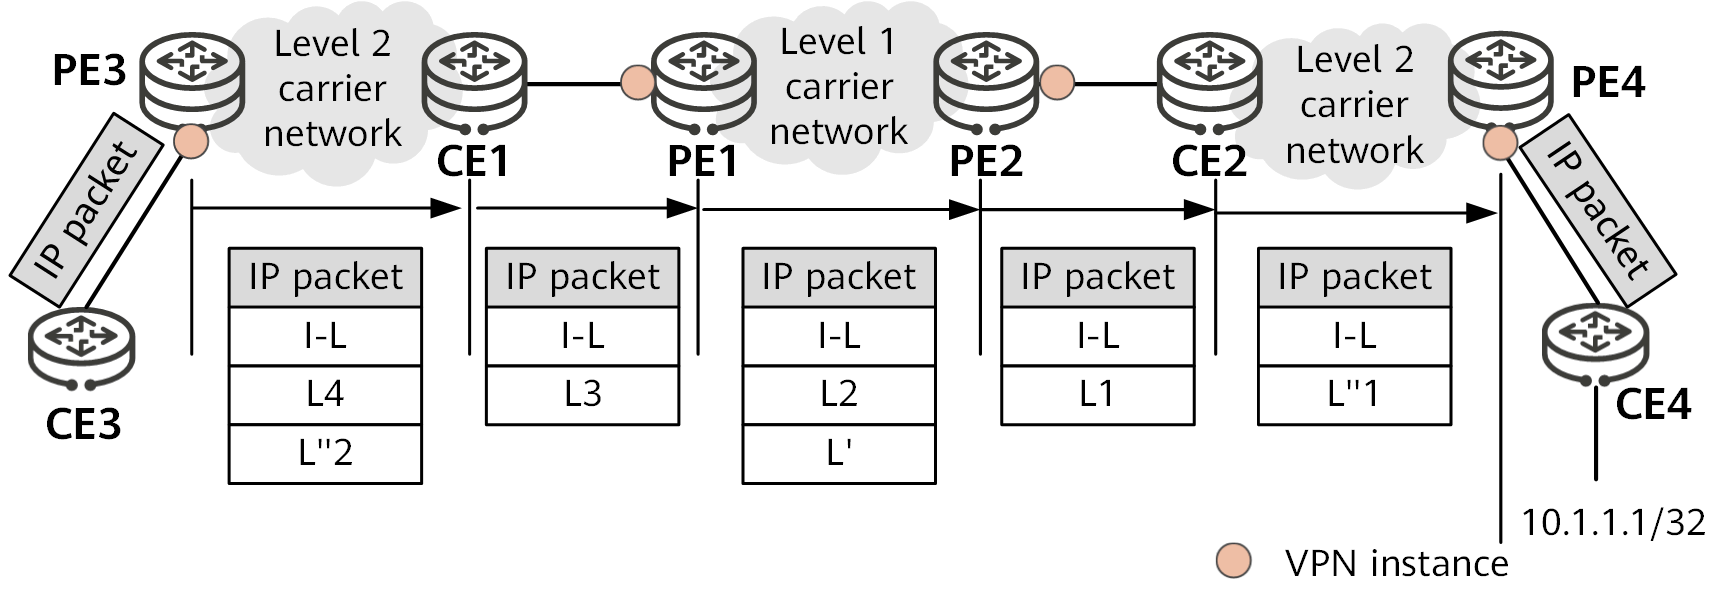 Packet forwarding based on BGP labeled routes